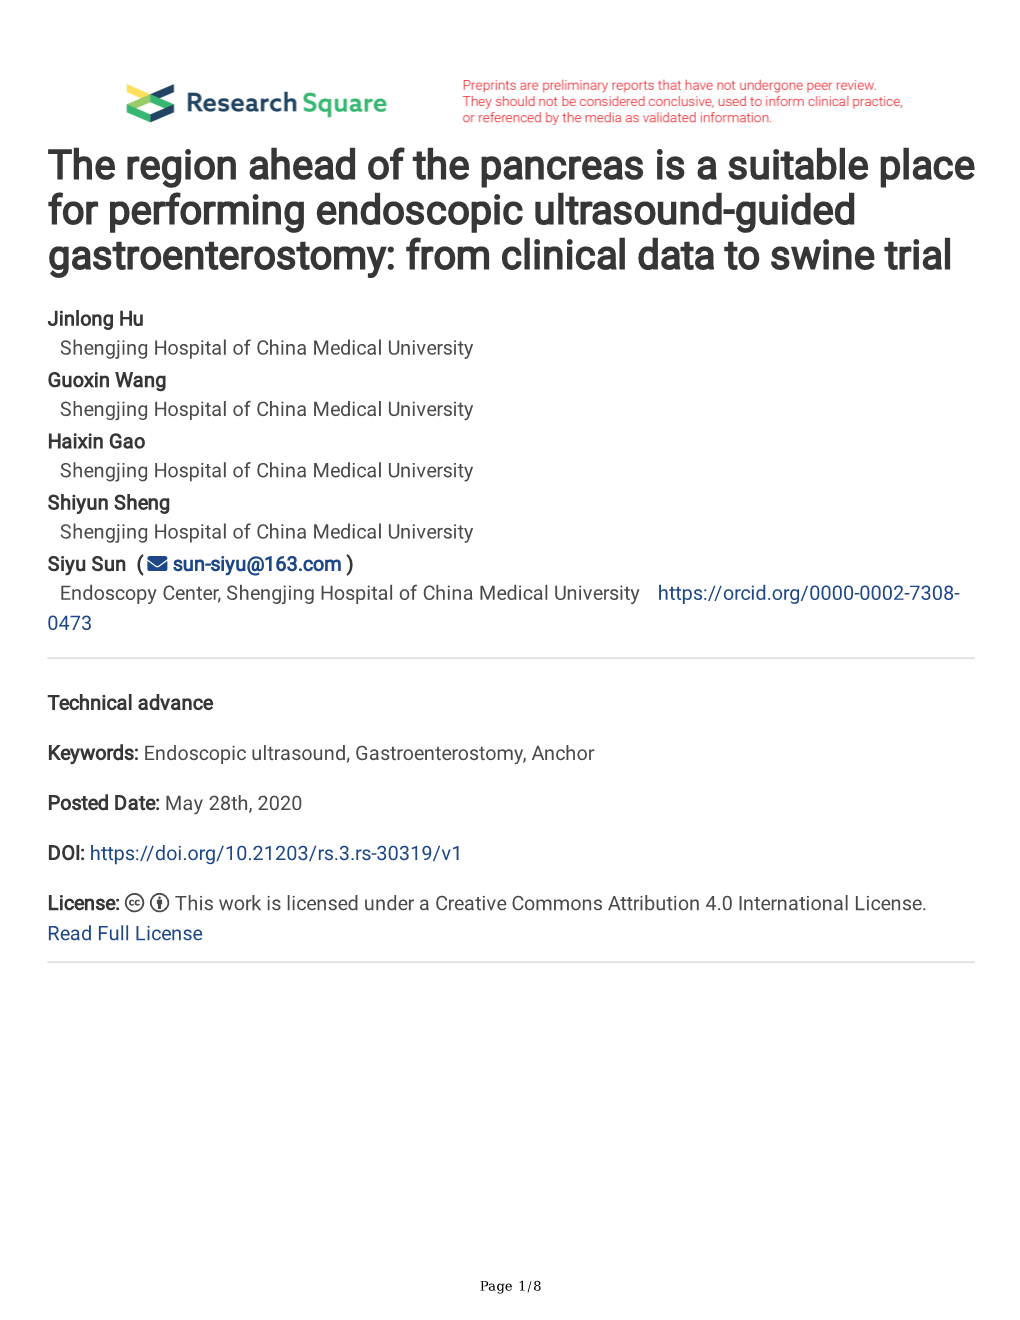 The Region Ahead of the Pancreas Is a Suitable Place for Performing Endoscopic Ultrasound-Guided Gastroenterostomy: from Clinical Data to Swine Trial